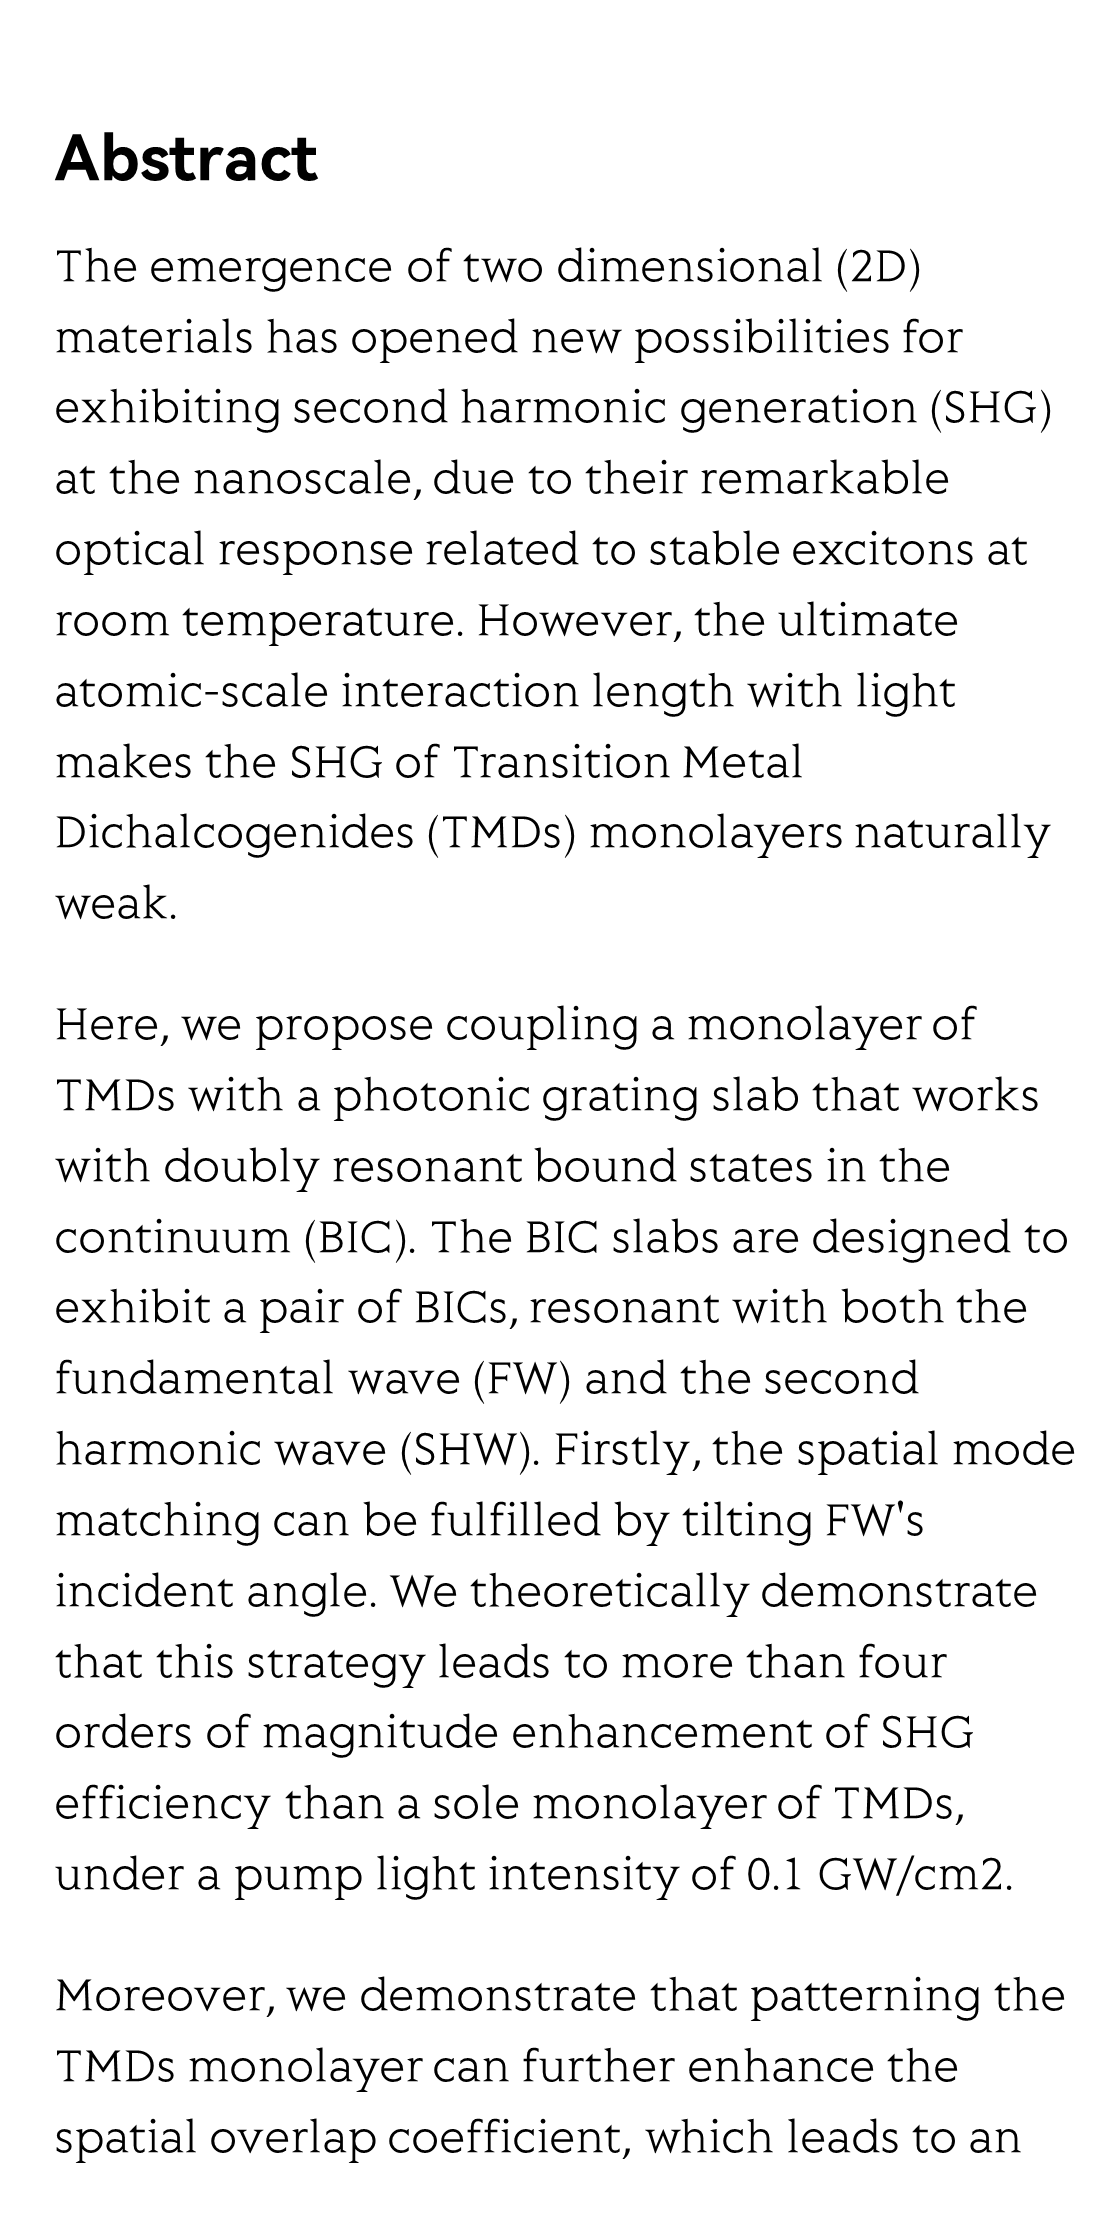 Dual bound states in the continuum enhanced second harmonic generation with transition metal dichalcogenides monolayer_2